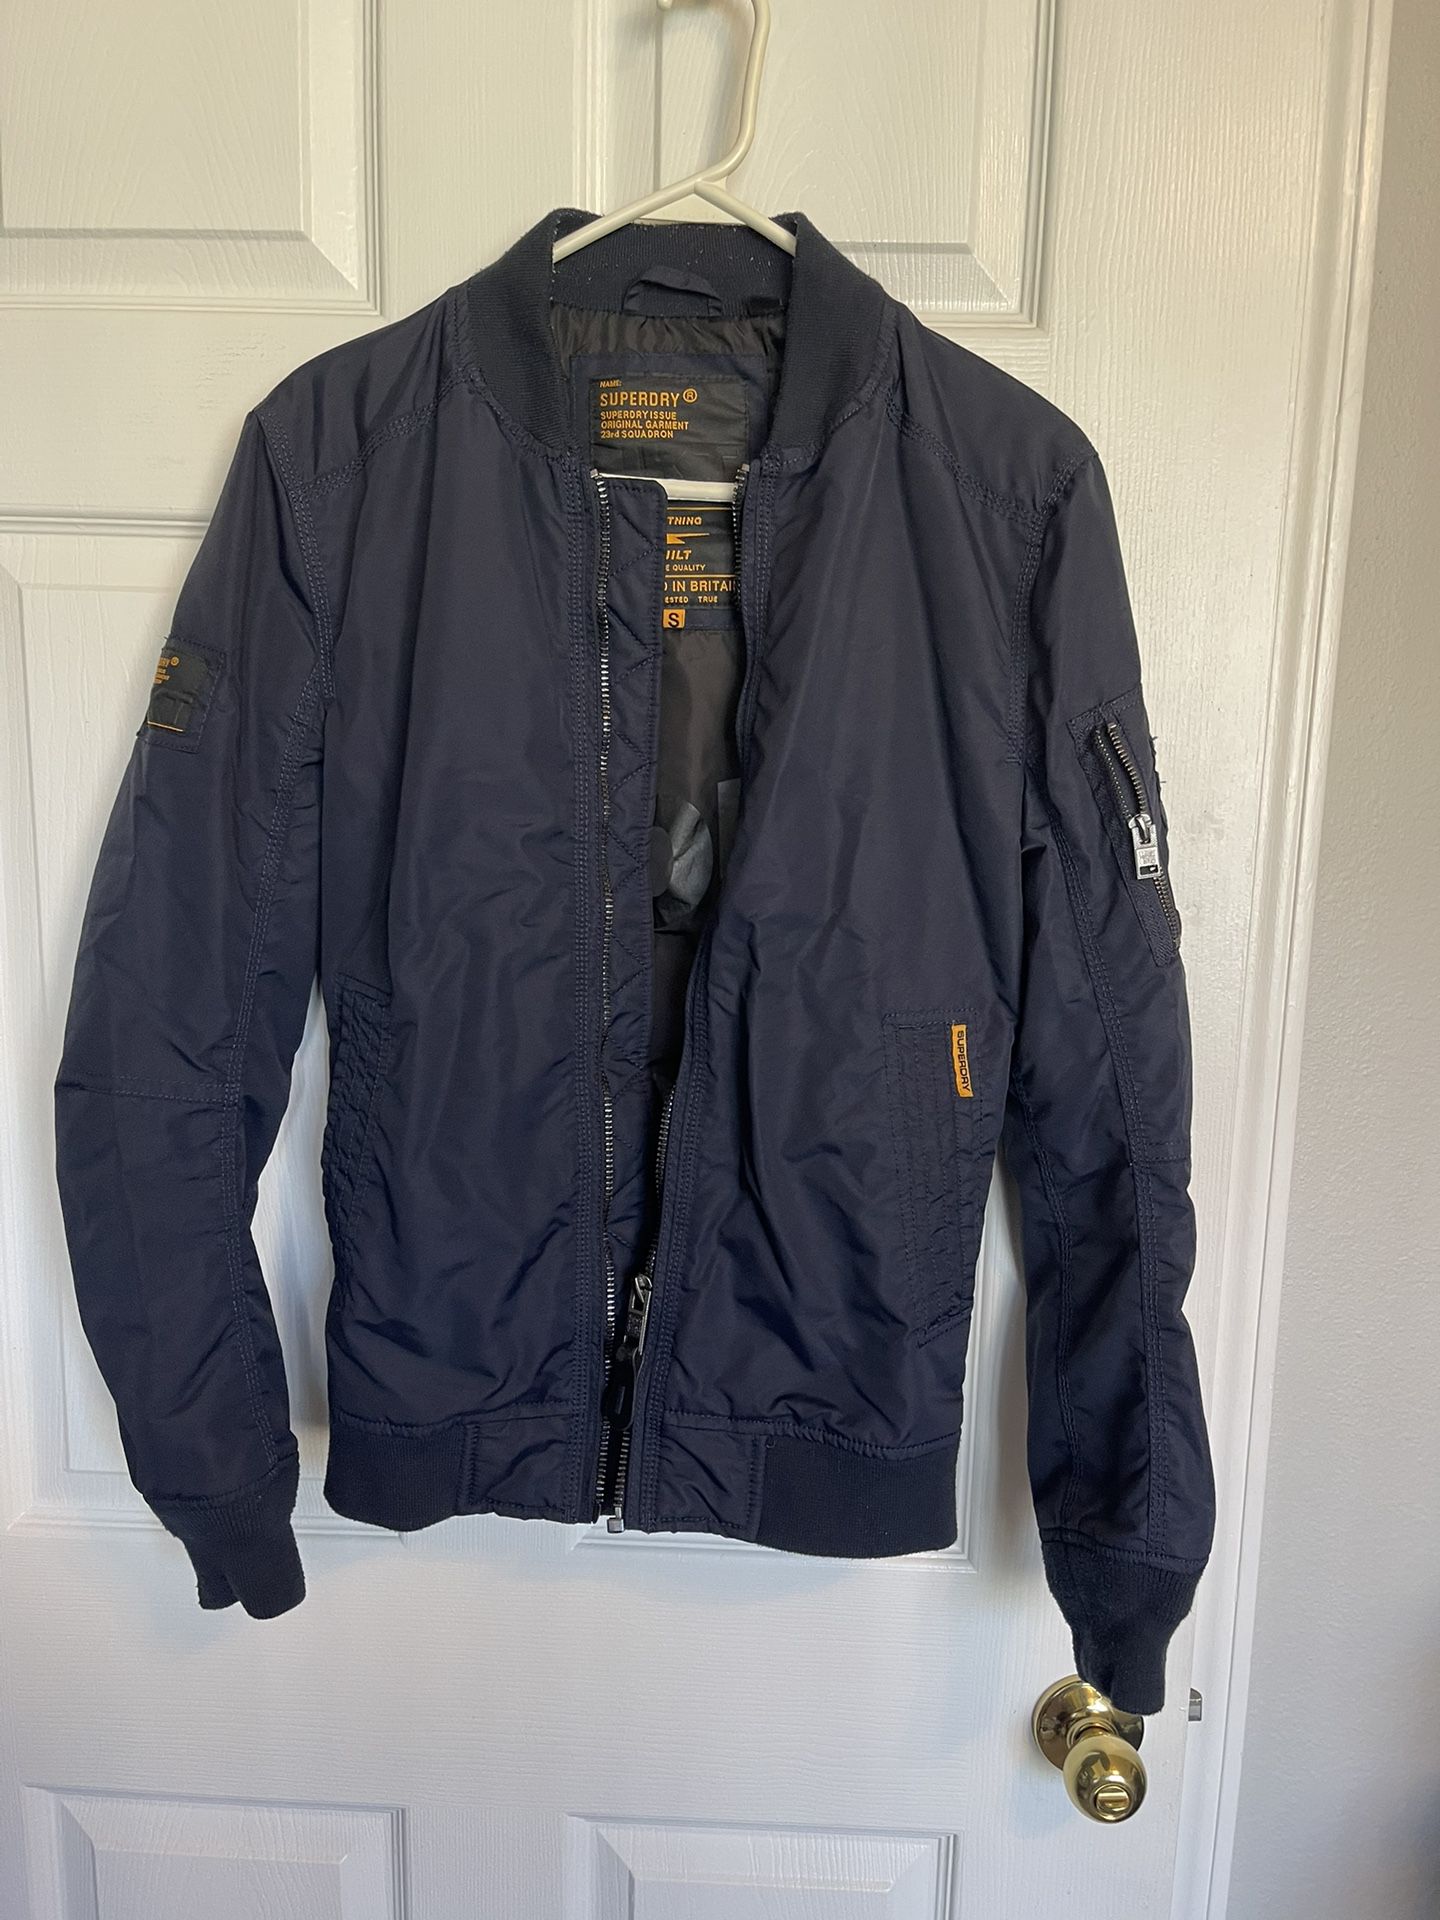 Men’s Jacket Small Blue Made By Superdry 